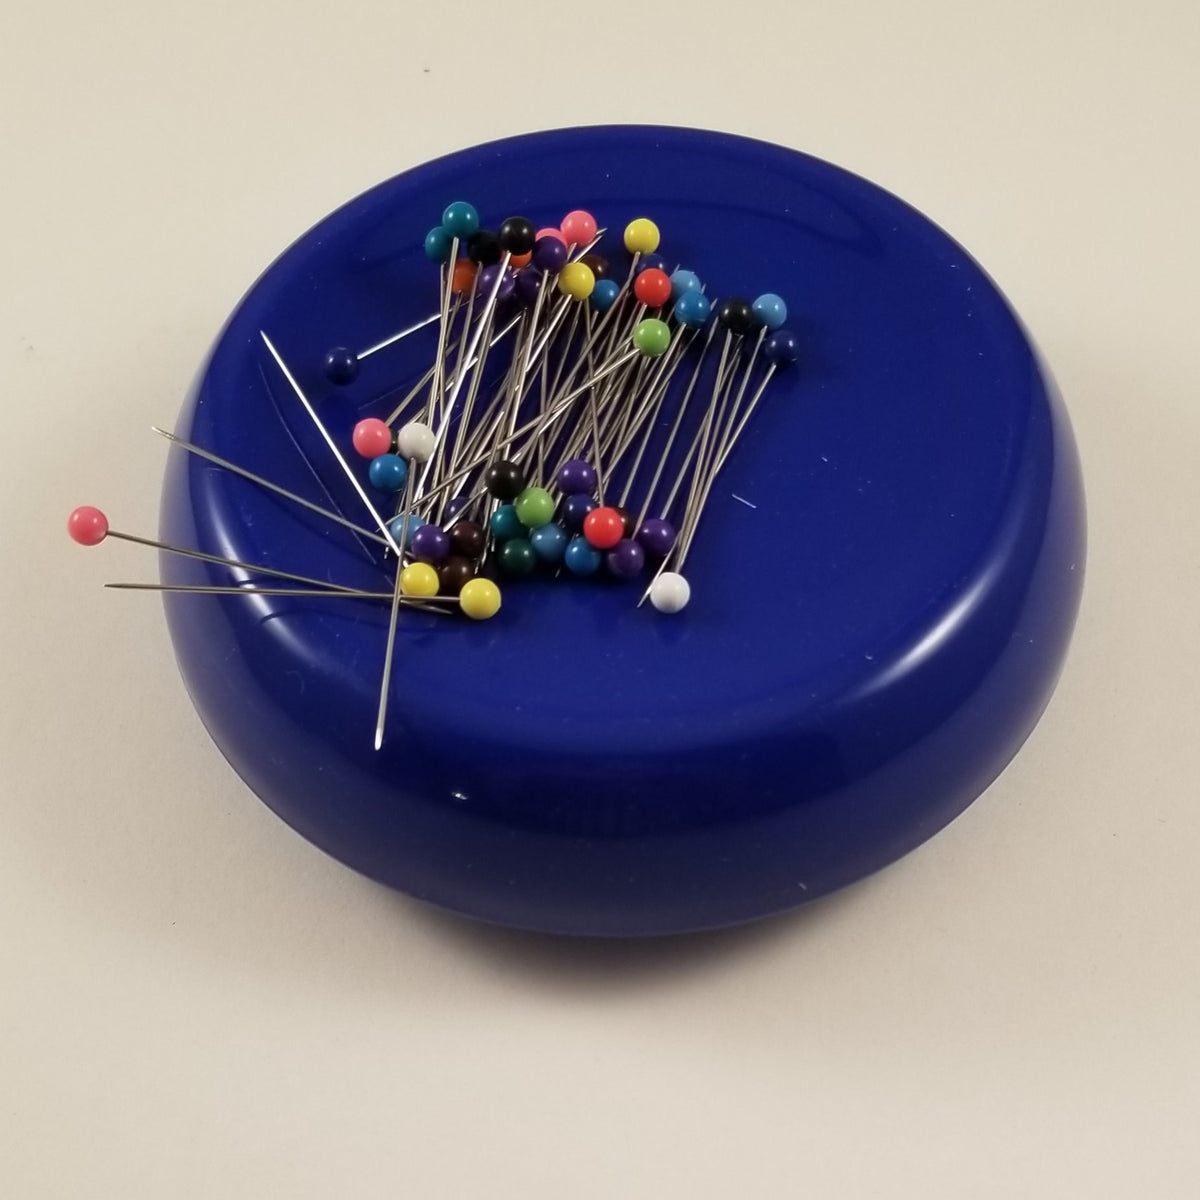  Magnetic Pin Cushion with 200 PCS Sewing Pins, Round